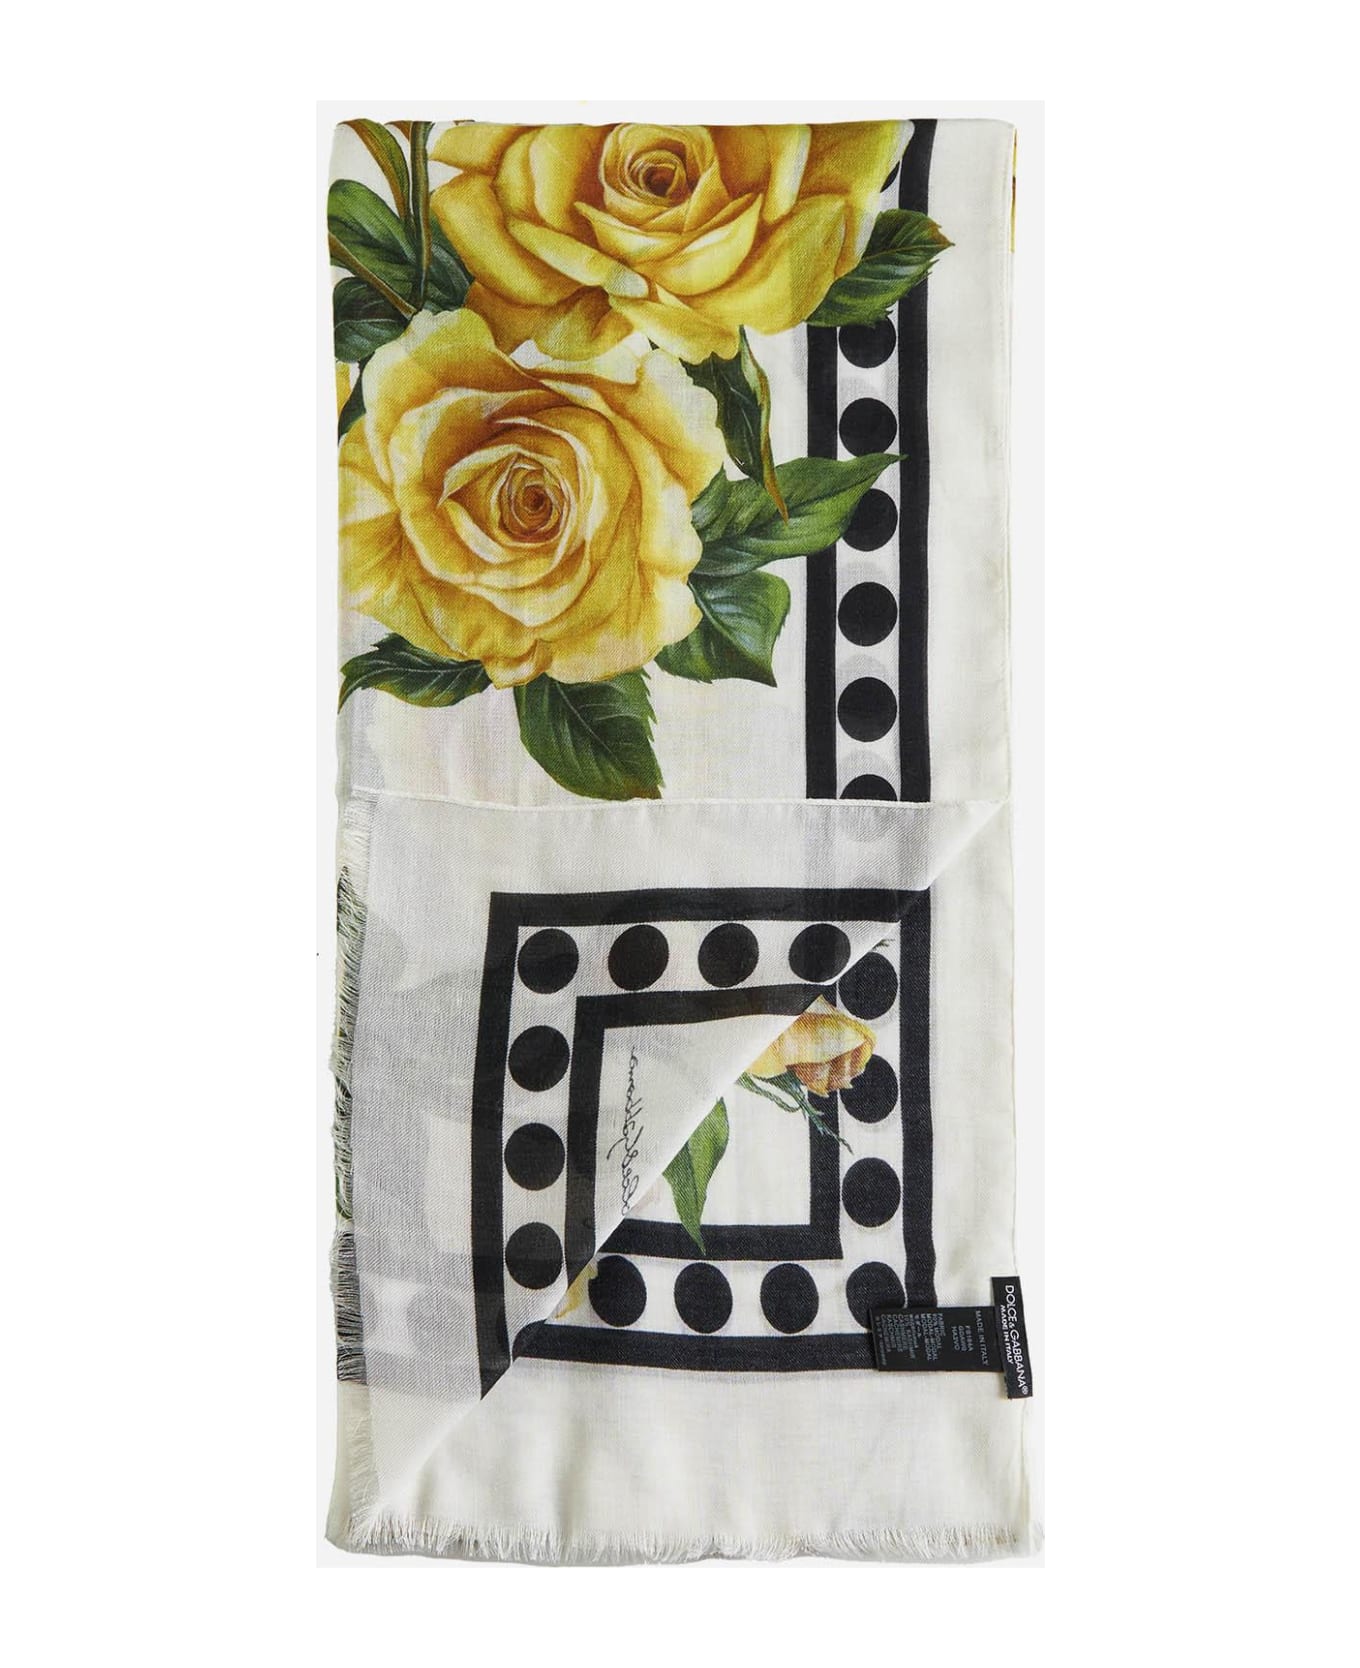 Dolce & Gabbana Modal And Cashmere Scarf - Rose gialle fdo bco